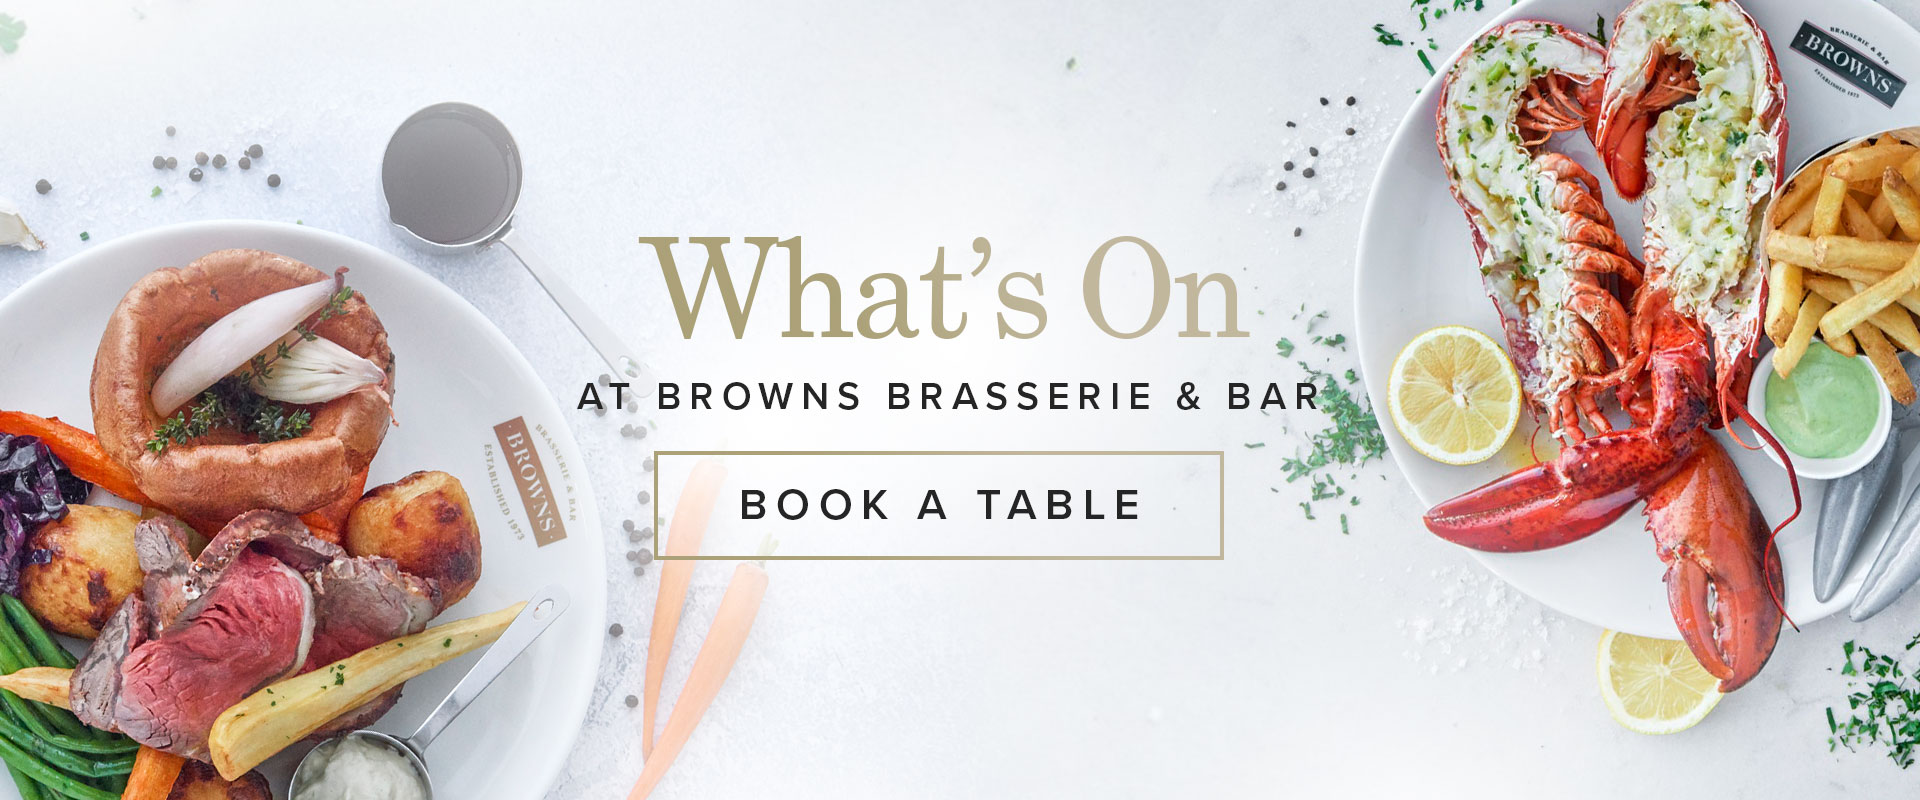 What's on at Browns Windsor | Browns